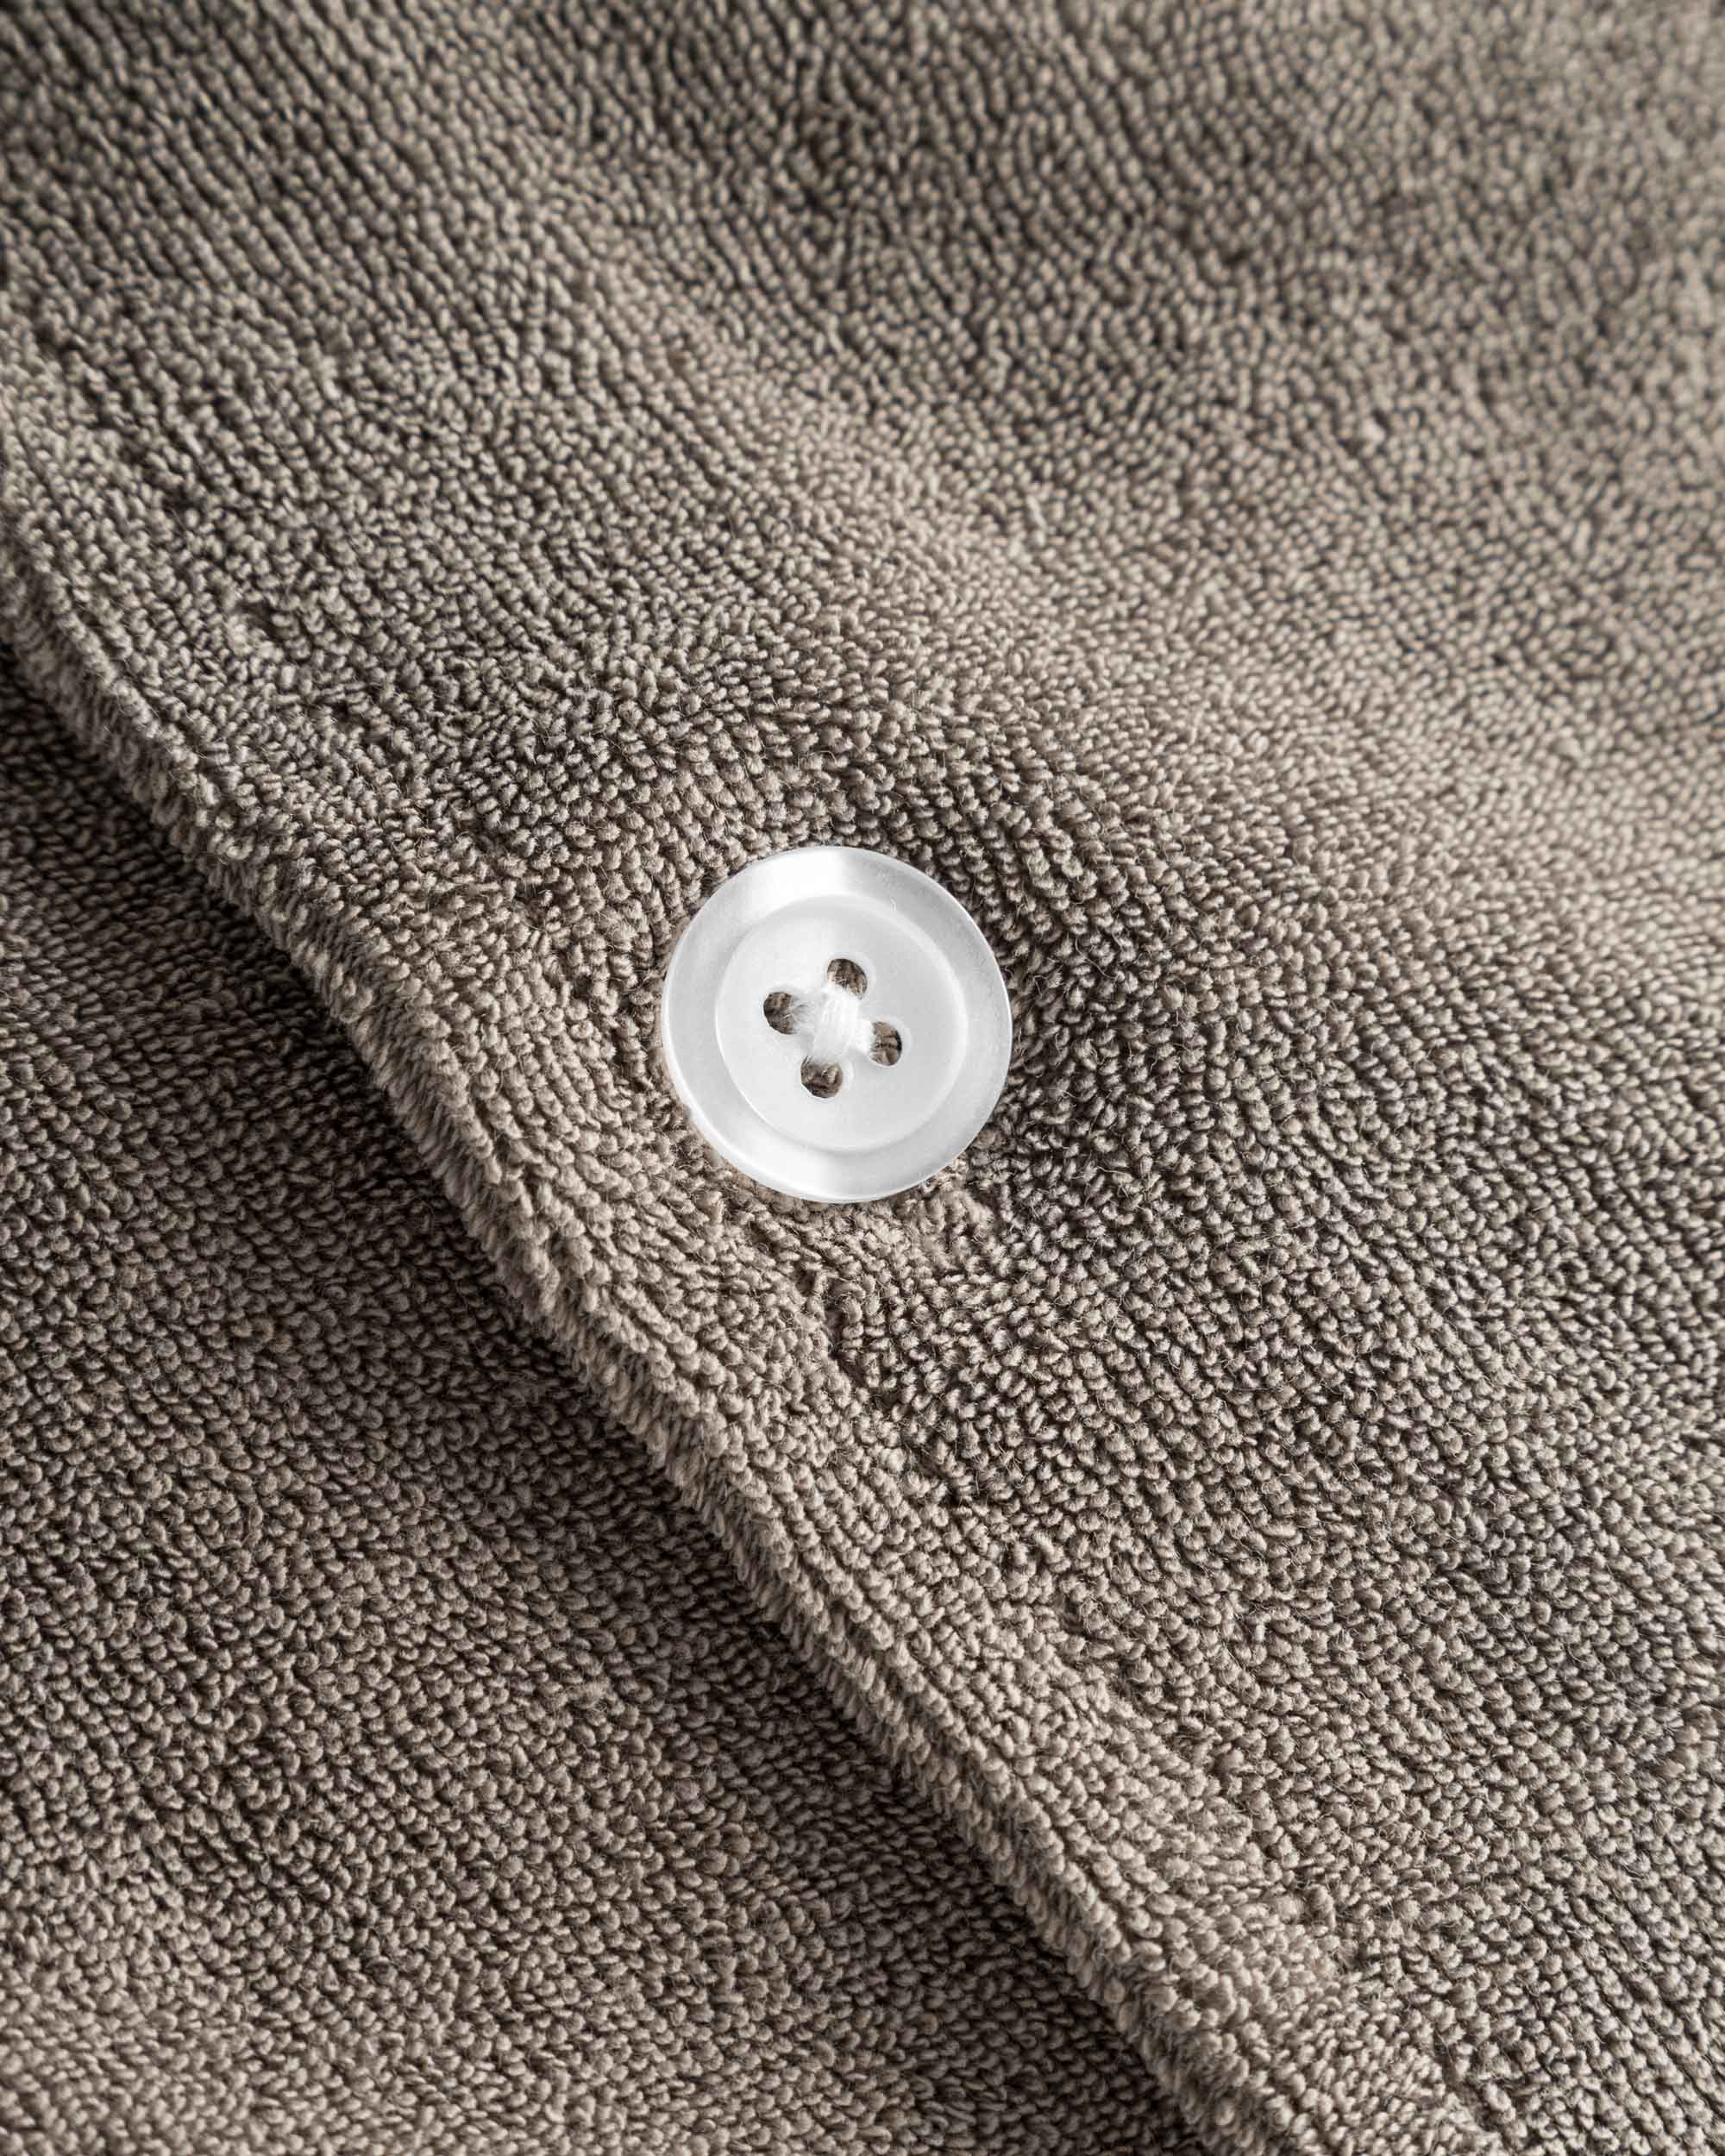 Close up of white pearl button on a dark grey short sleeve shirt.